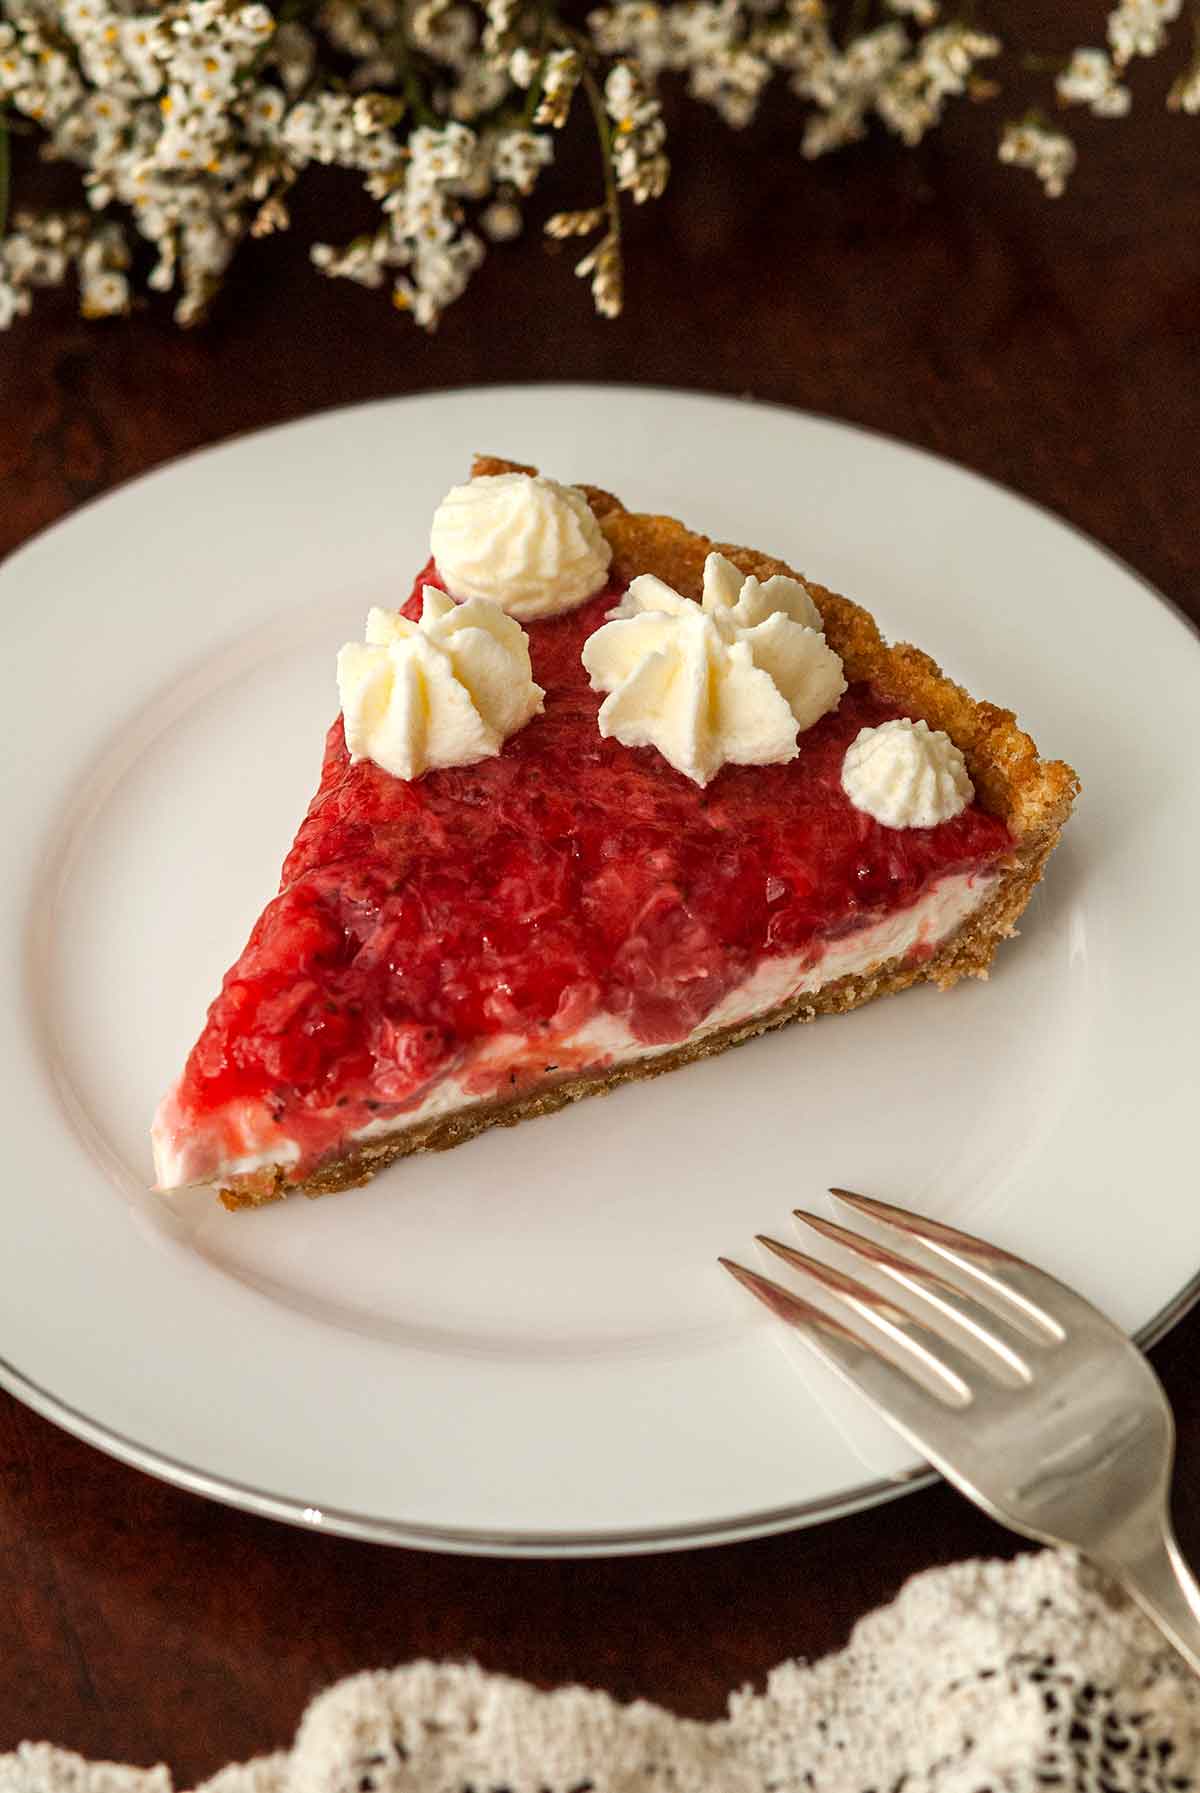 A slice of strawberry rhubarb tart on a plate with a fork.